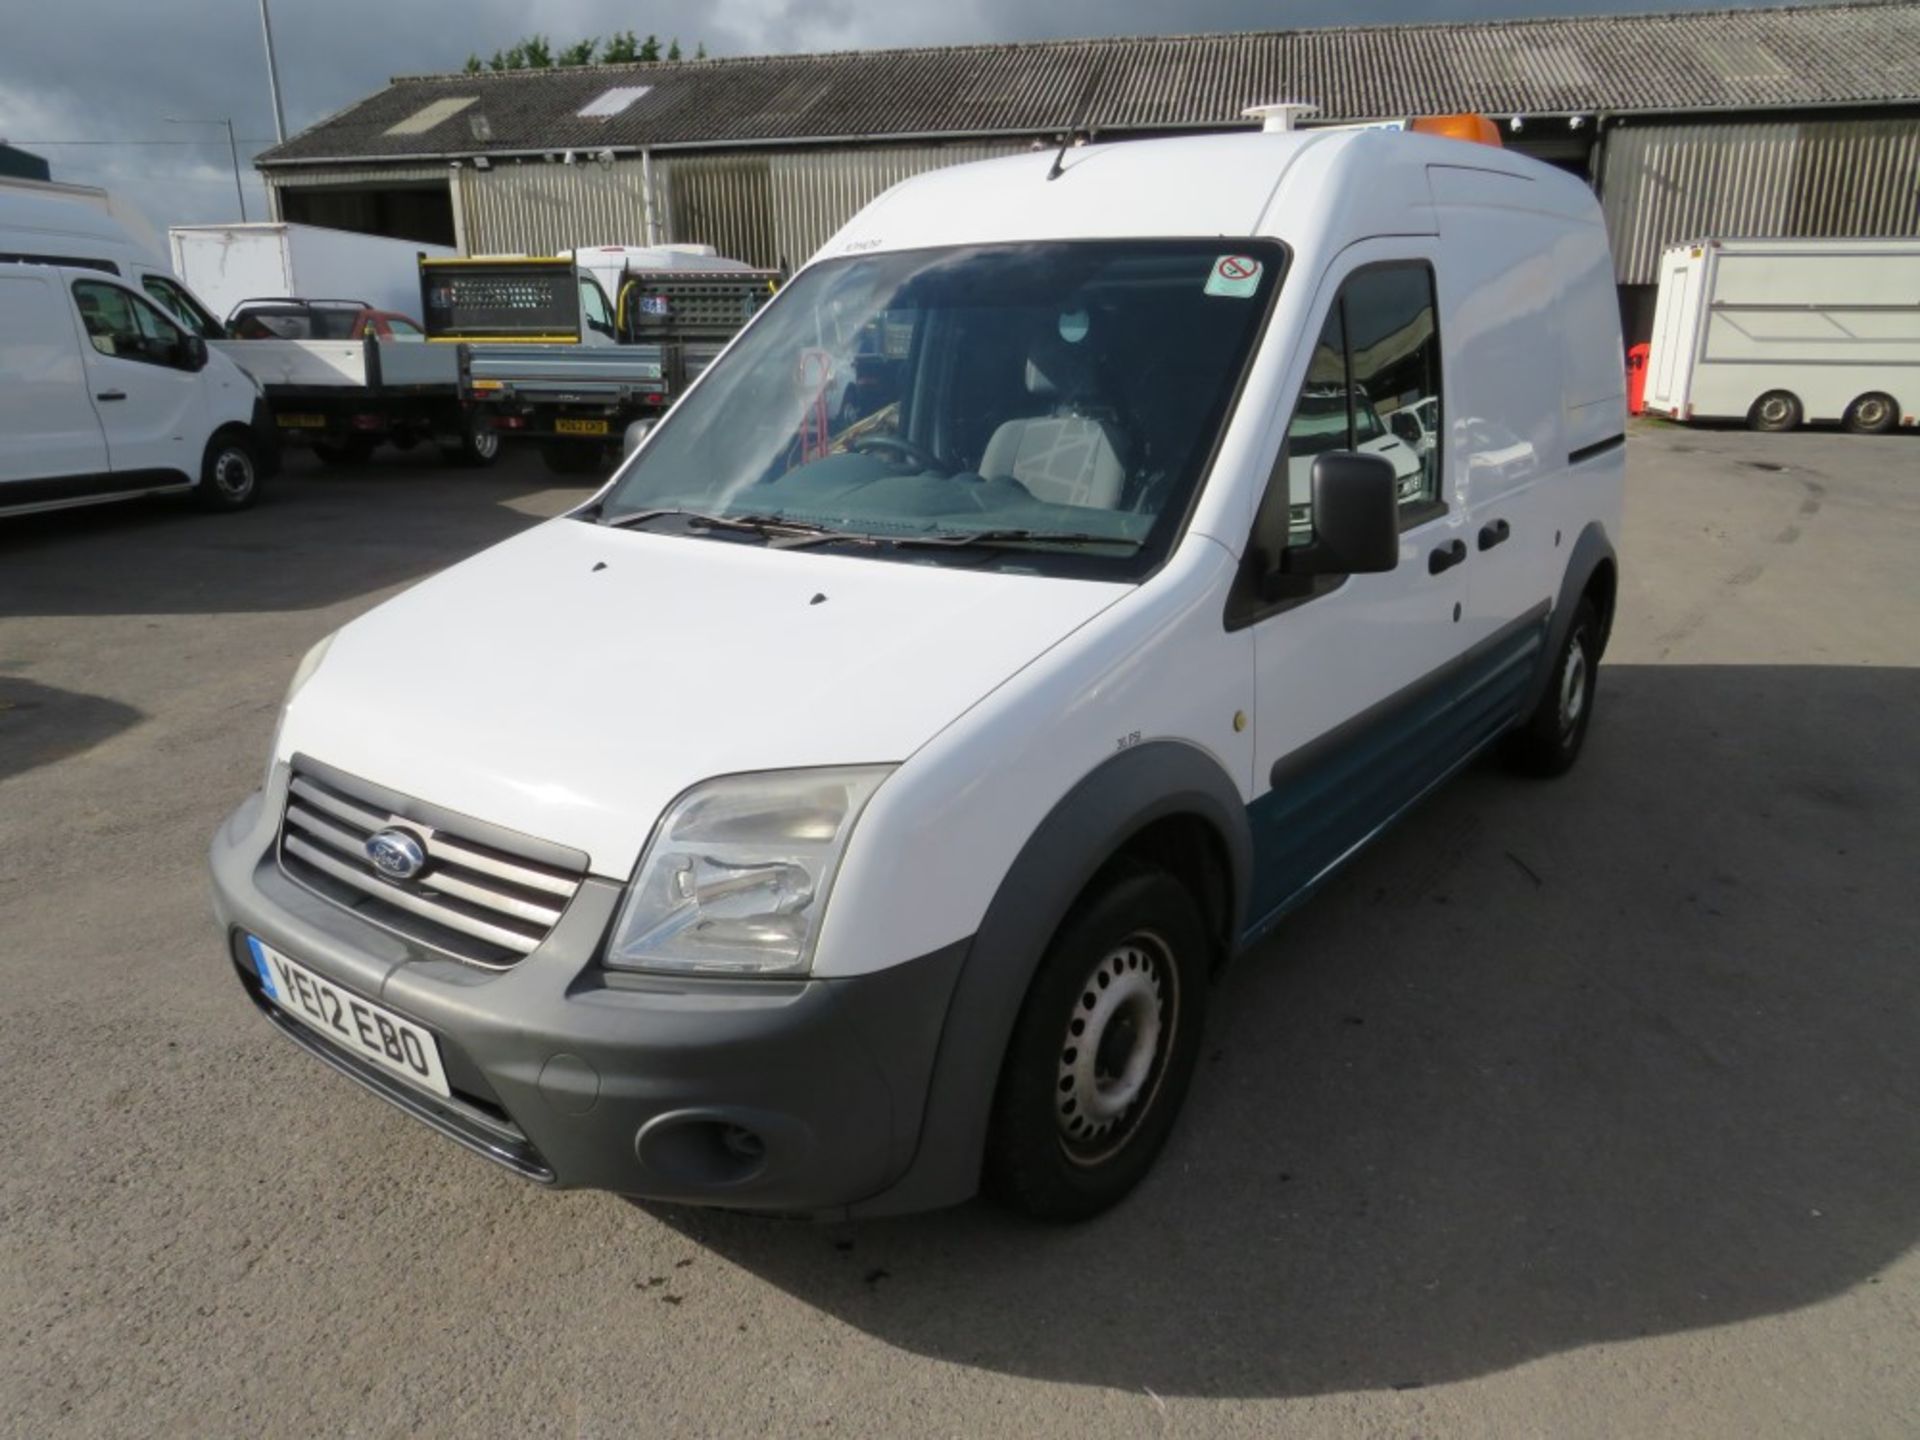 12 reg FORD TRANSIT CONNECT 90 T230 (DIRECT UNITED UTILITIES WATER) 1ST REG 07/12, TEST 11/20, V5 - Image 2 of 6